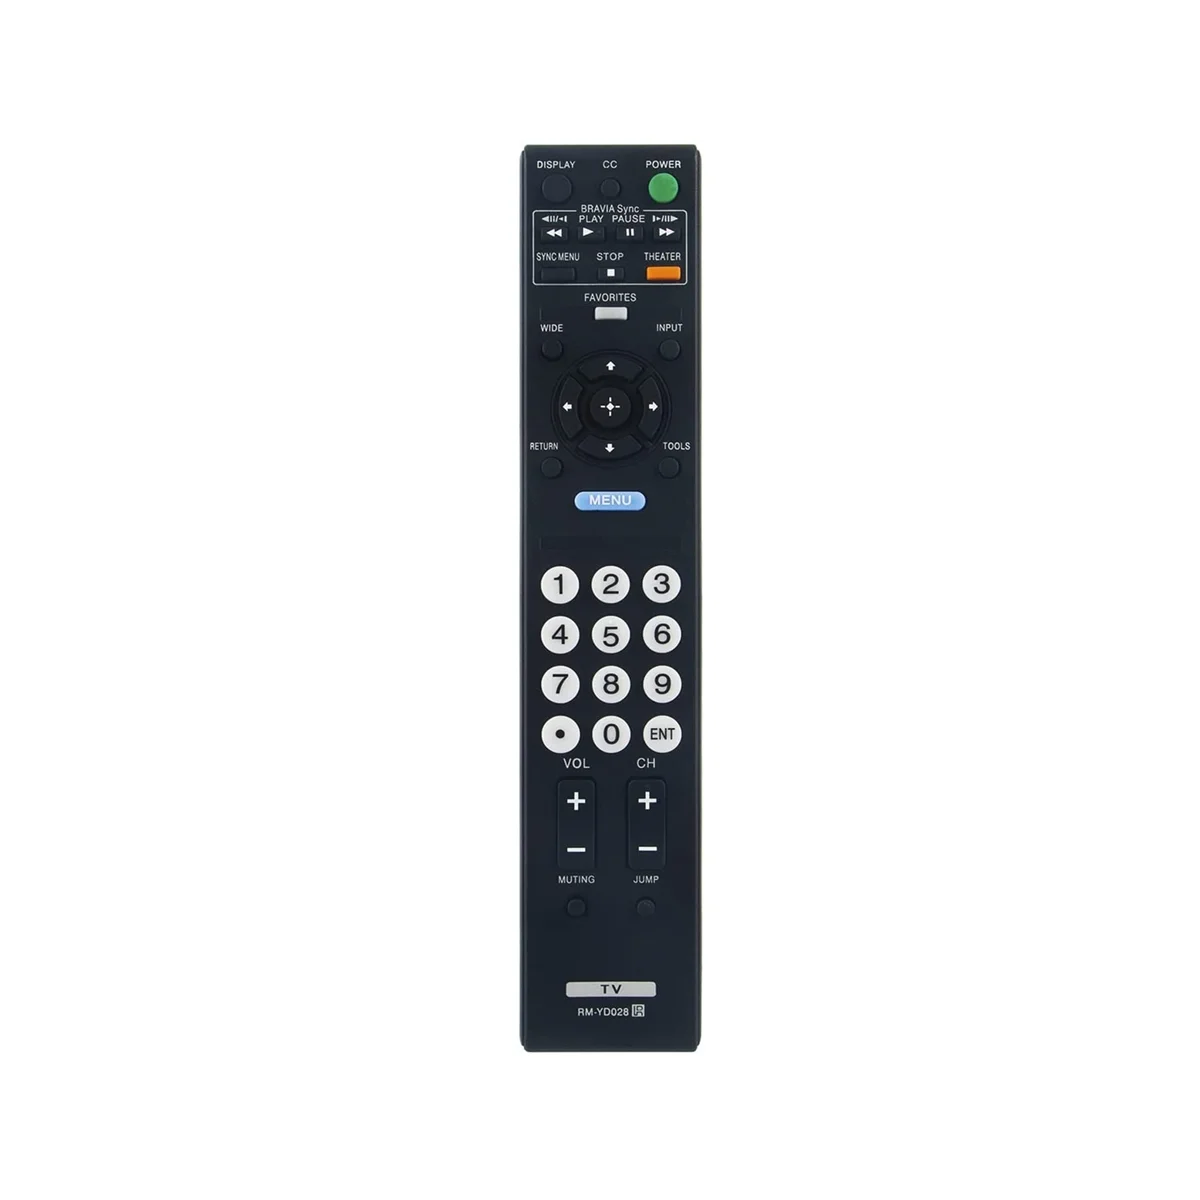 

RM-YD028 Remote Control Replace for Sony LED TV KDL-32L5000 KDL-22L5000 KDL-26L5000 KDL-37L5000 KDL-40SL150